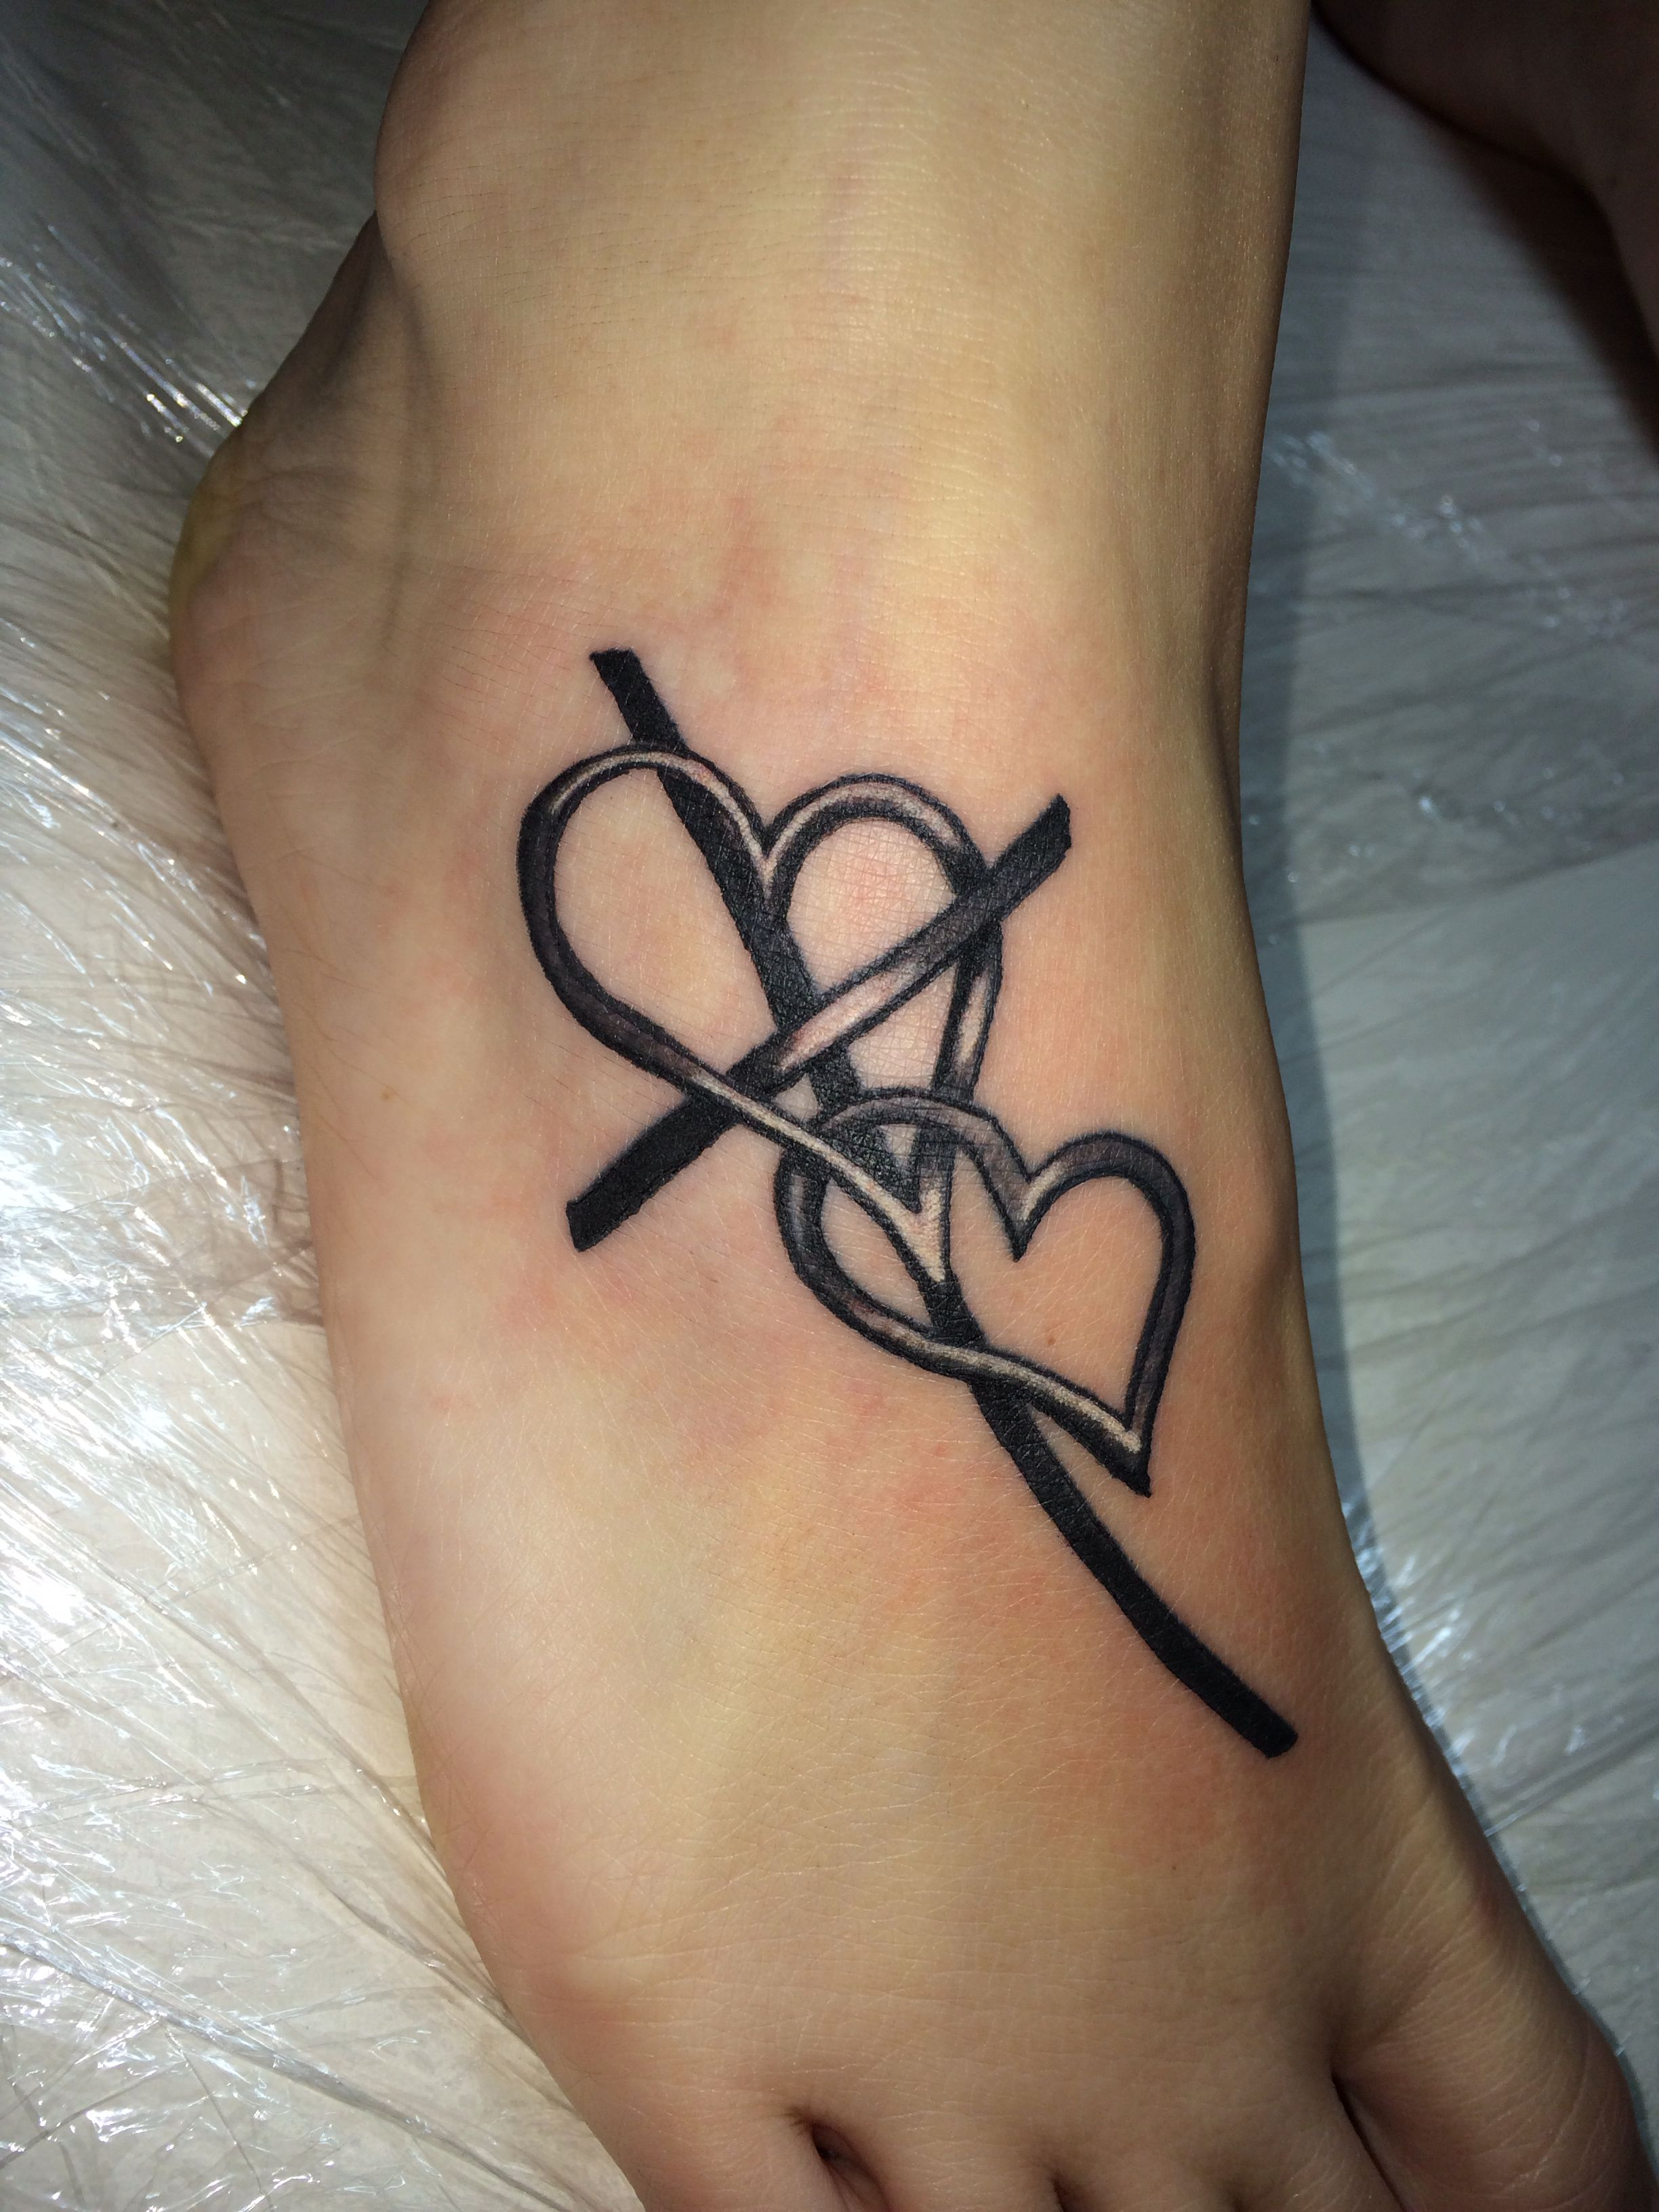 Cross And Heart Tattoos 93 Images In Collection Page 2 with size 2448 X 3264